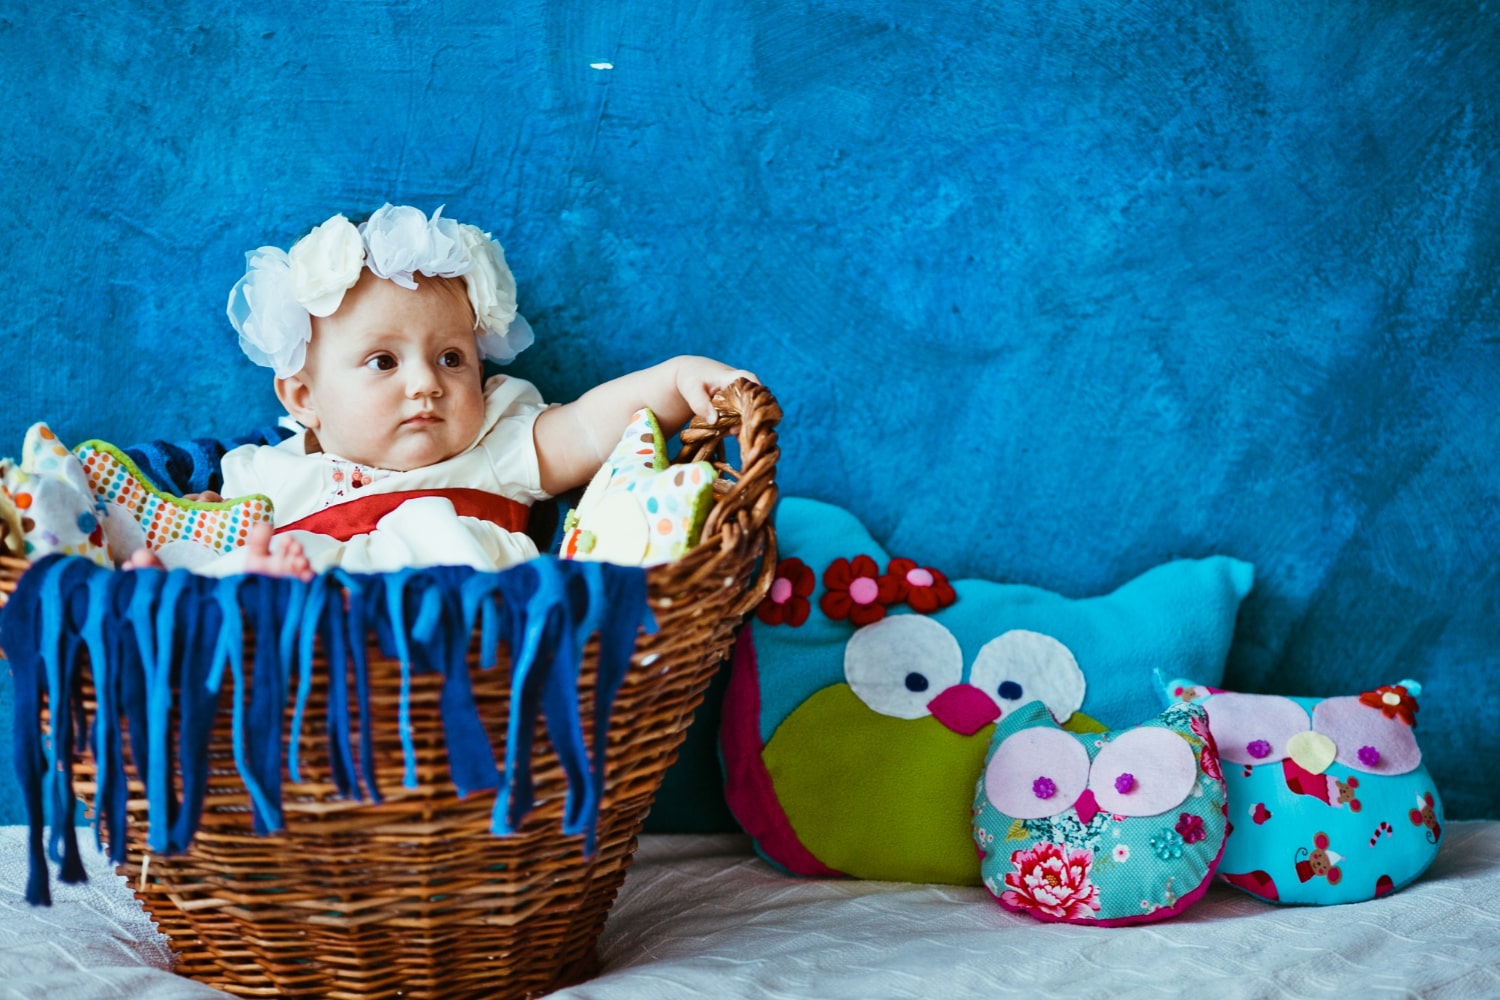 Nursery bliss: Adorable 6-Month Baby's At-Home Photoshoot